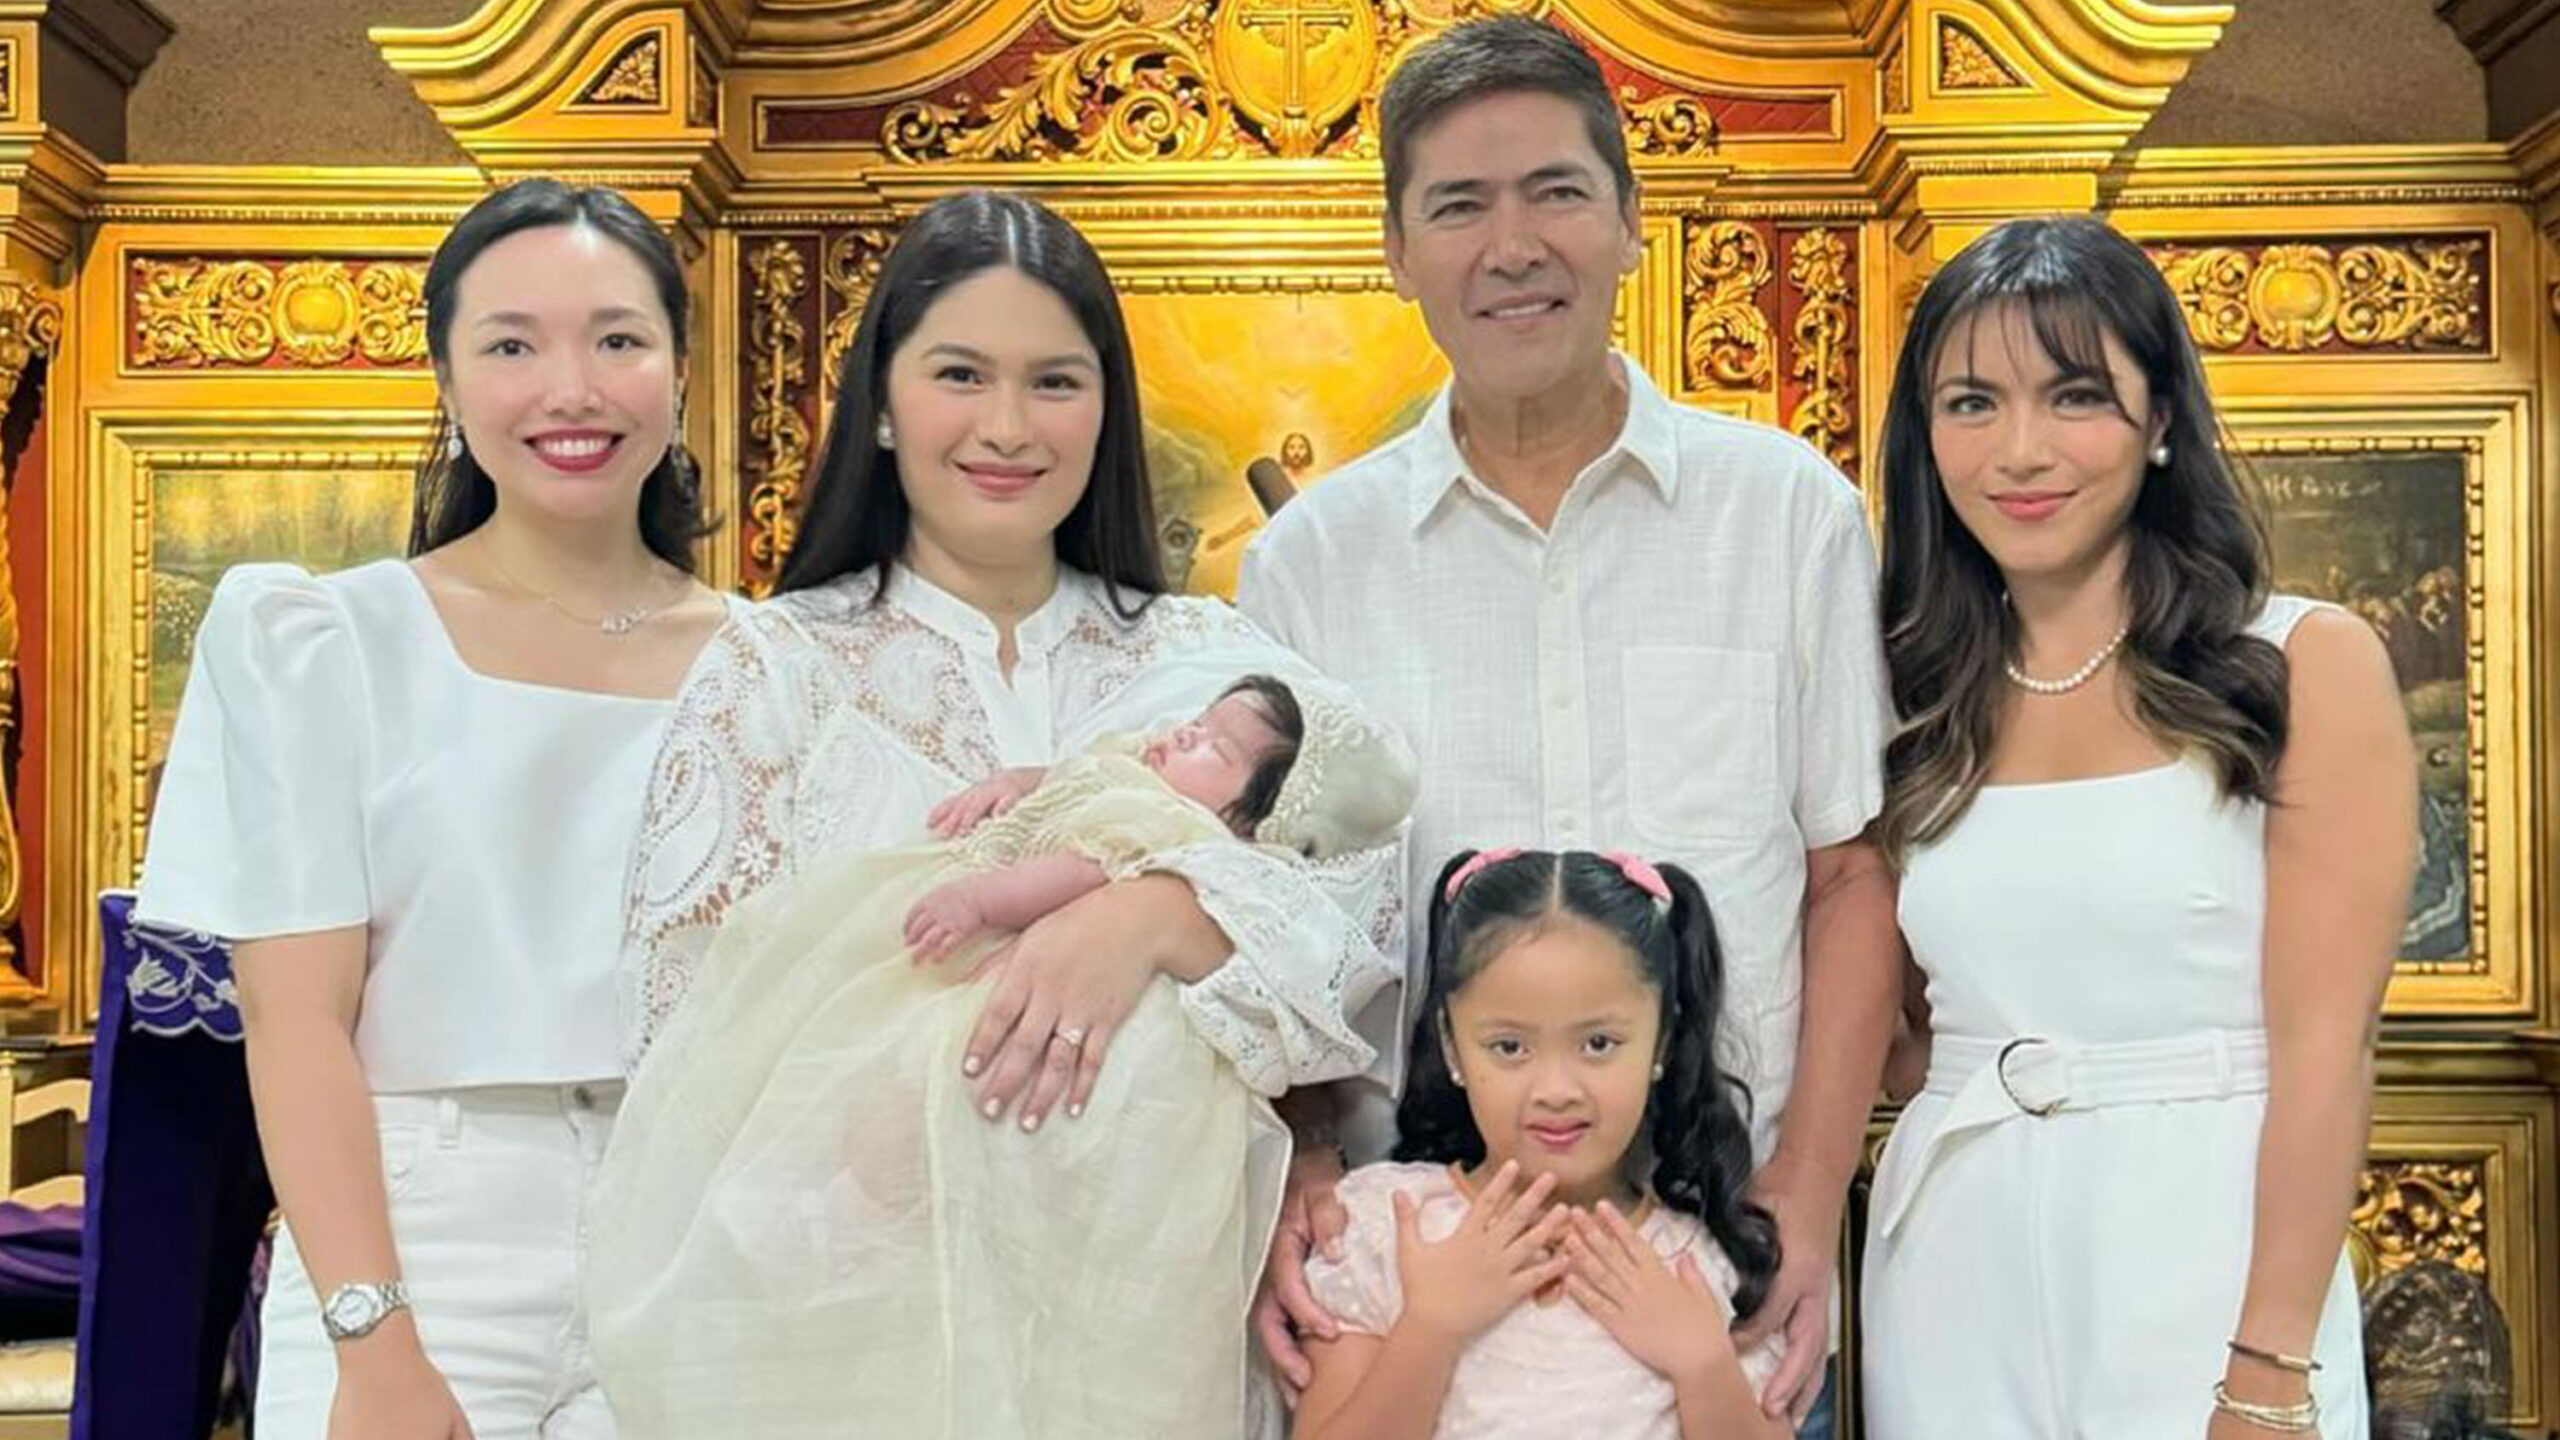 LOOK: Pauleen Luna and Vic Sotto's Daughter Thia Is Baptized